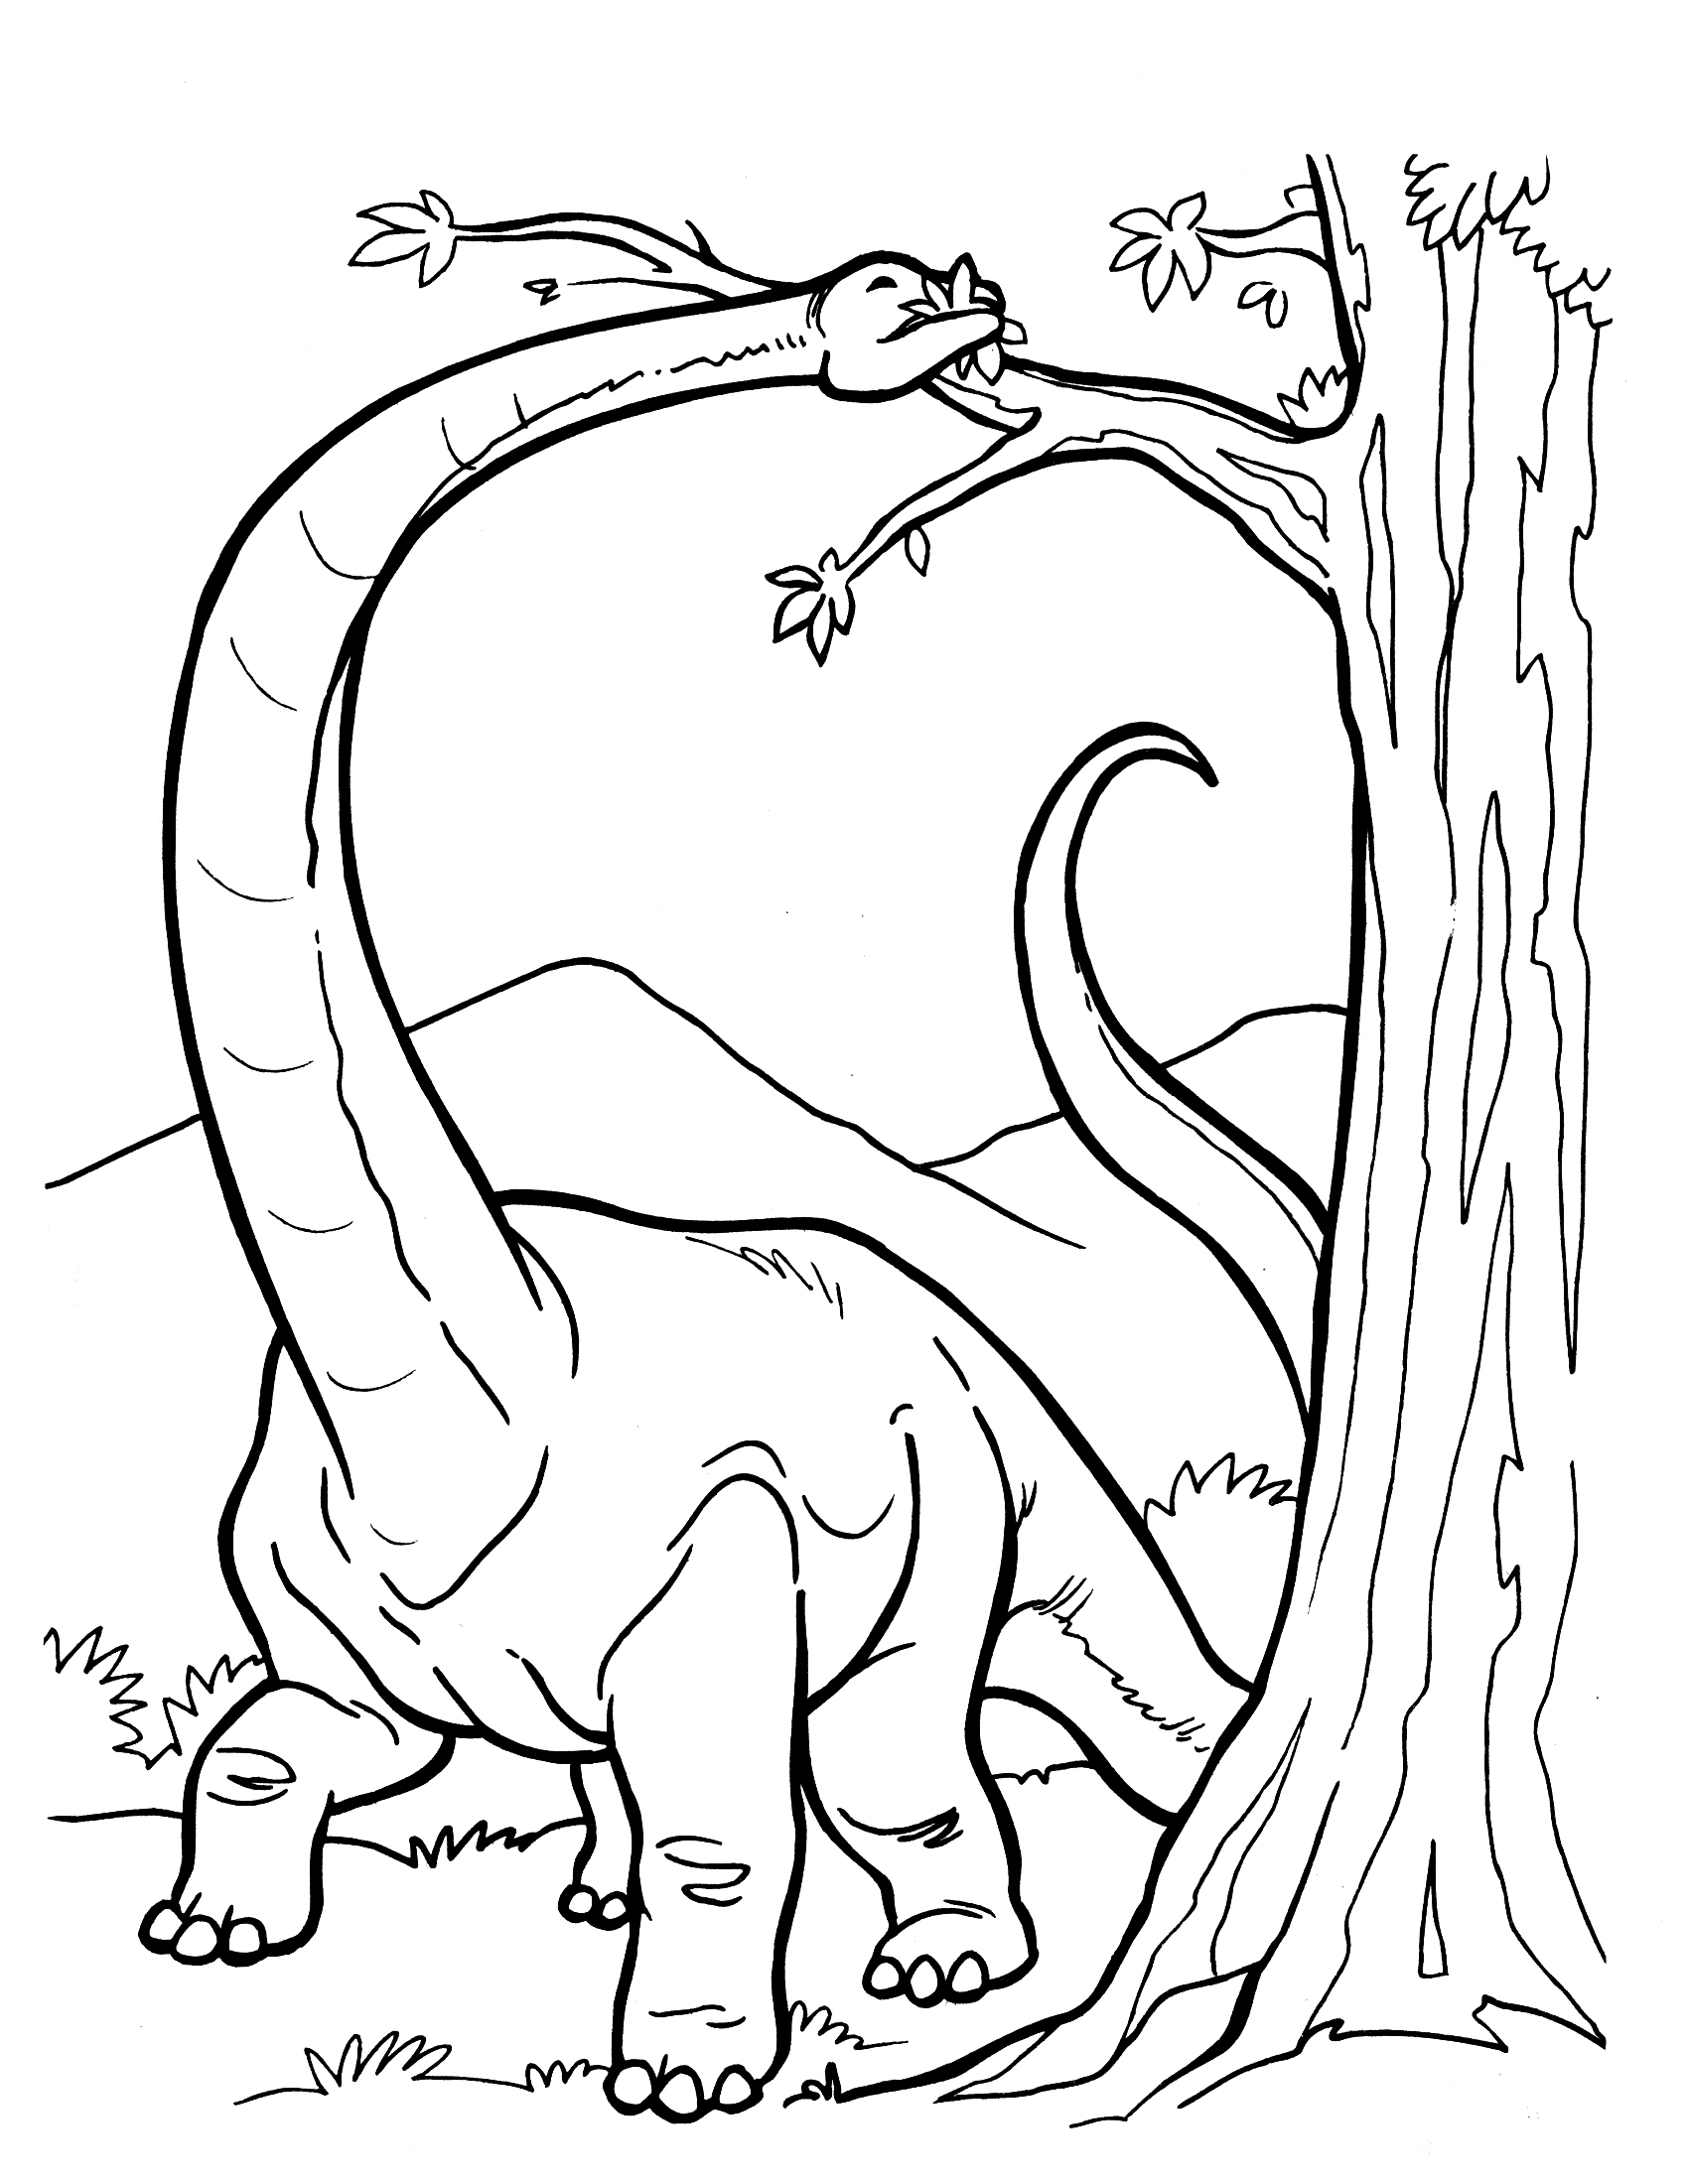  Long Dinosaur Coloring Pages  | Coloring pages for Boys